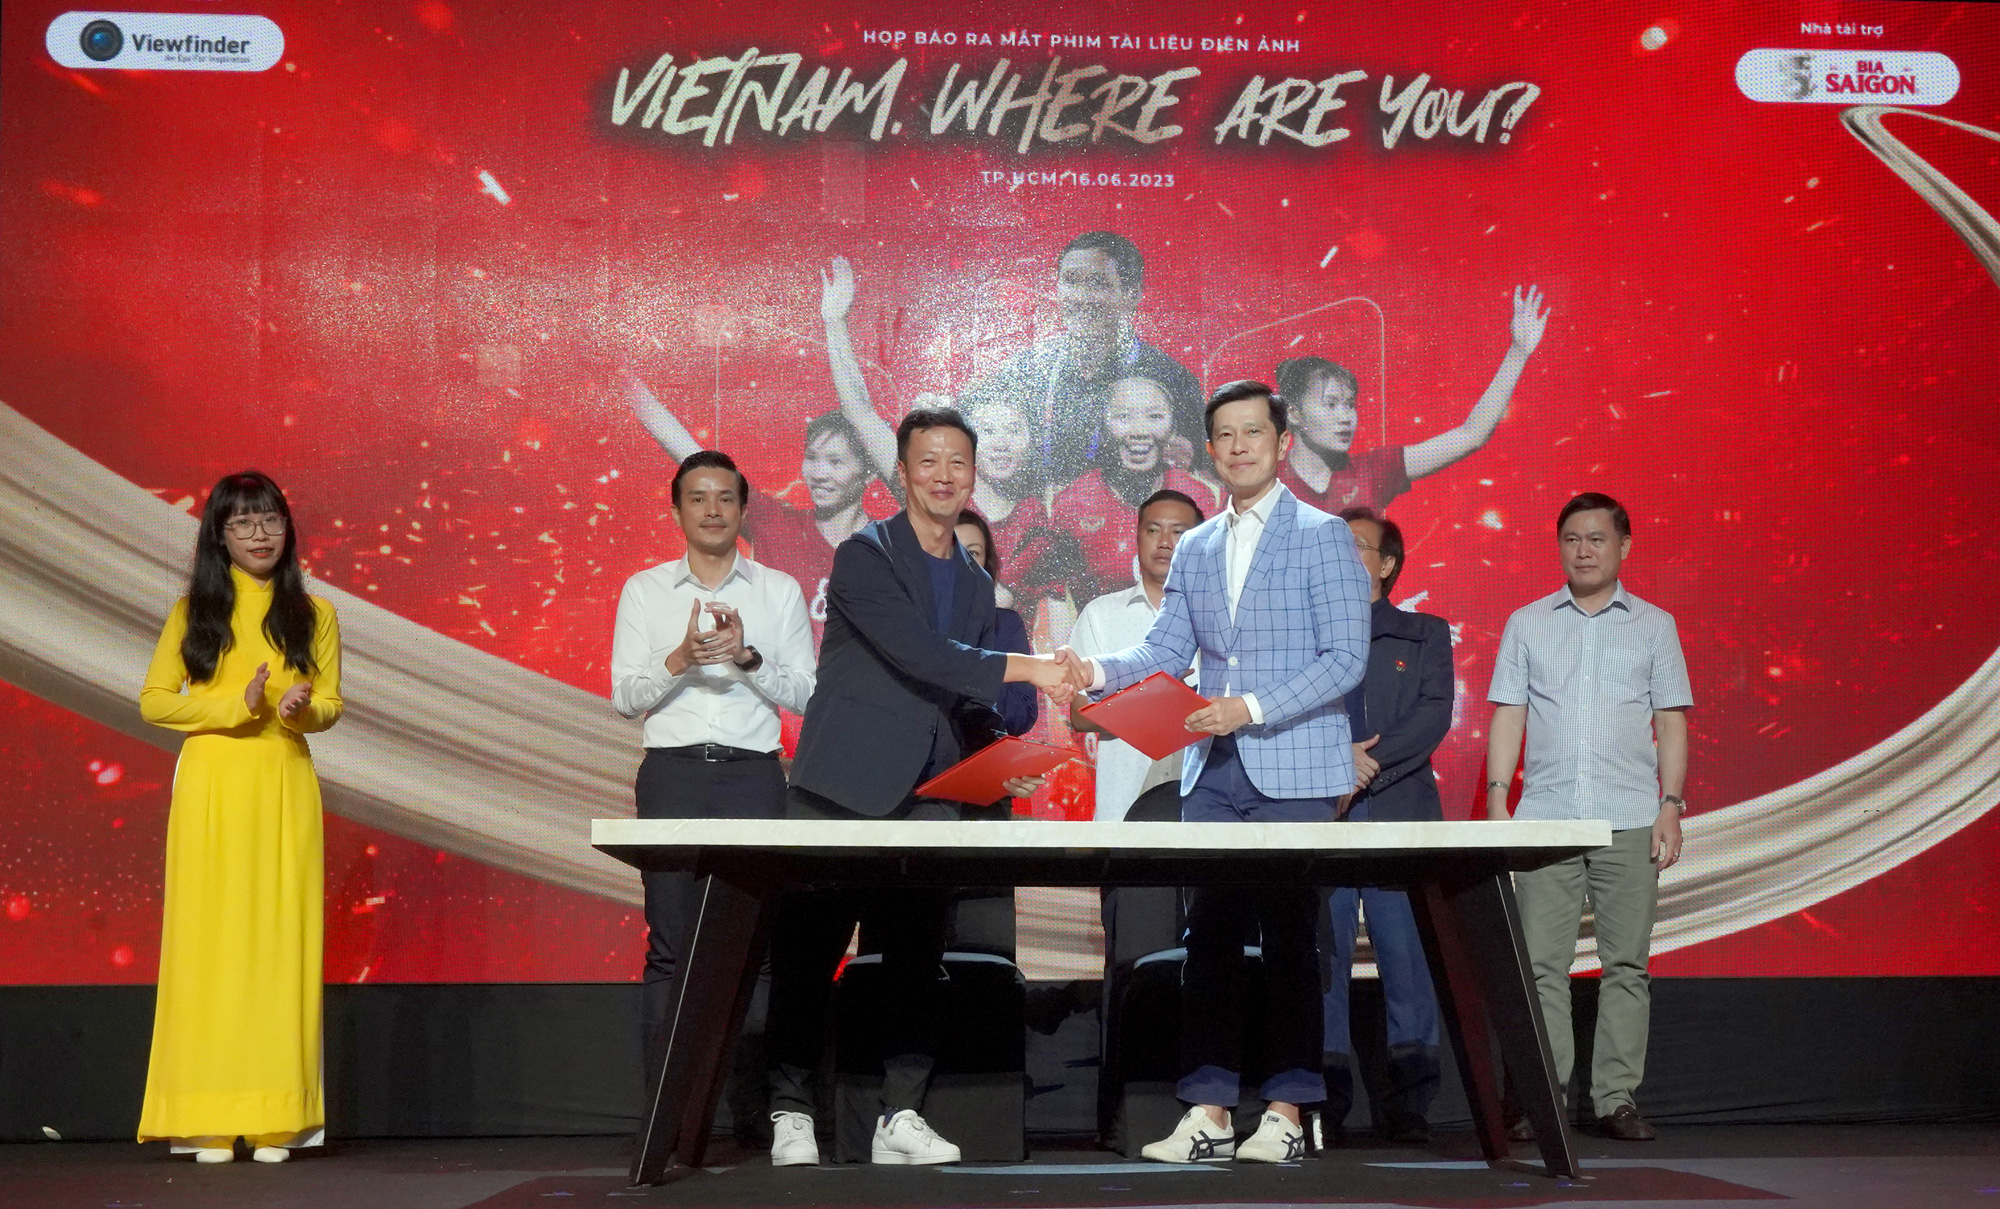 Delegates attend the press conference of the ‘Vietnam, Where are you?’ documentary about the Vietnamese national women’s football team in Ho Chi Minh City, June 16, 2023. Photo: Supplied